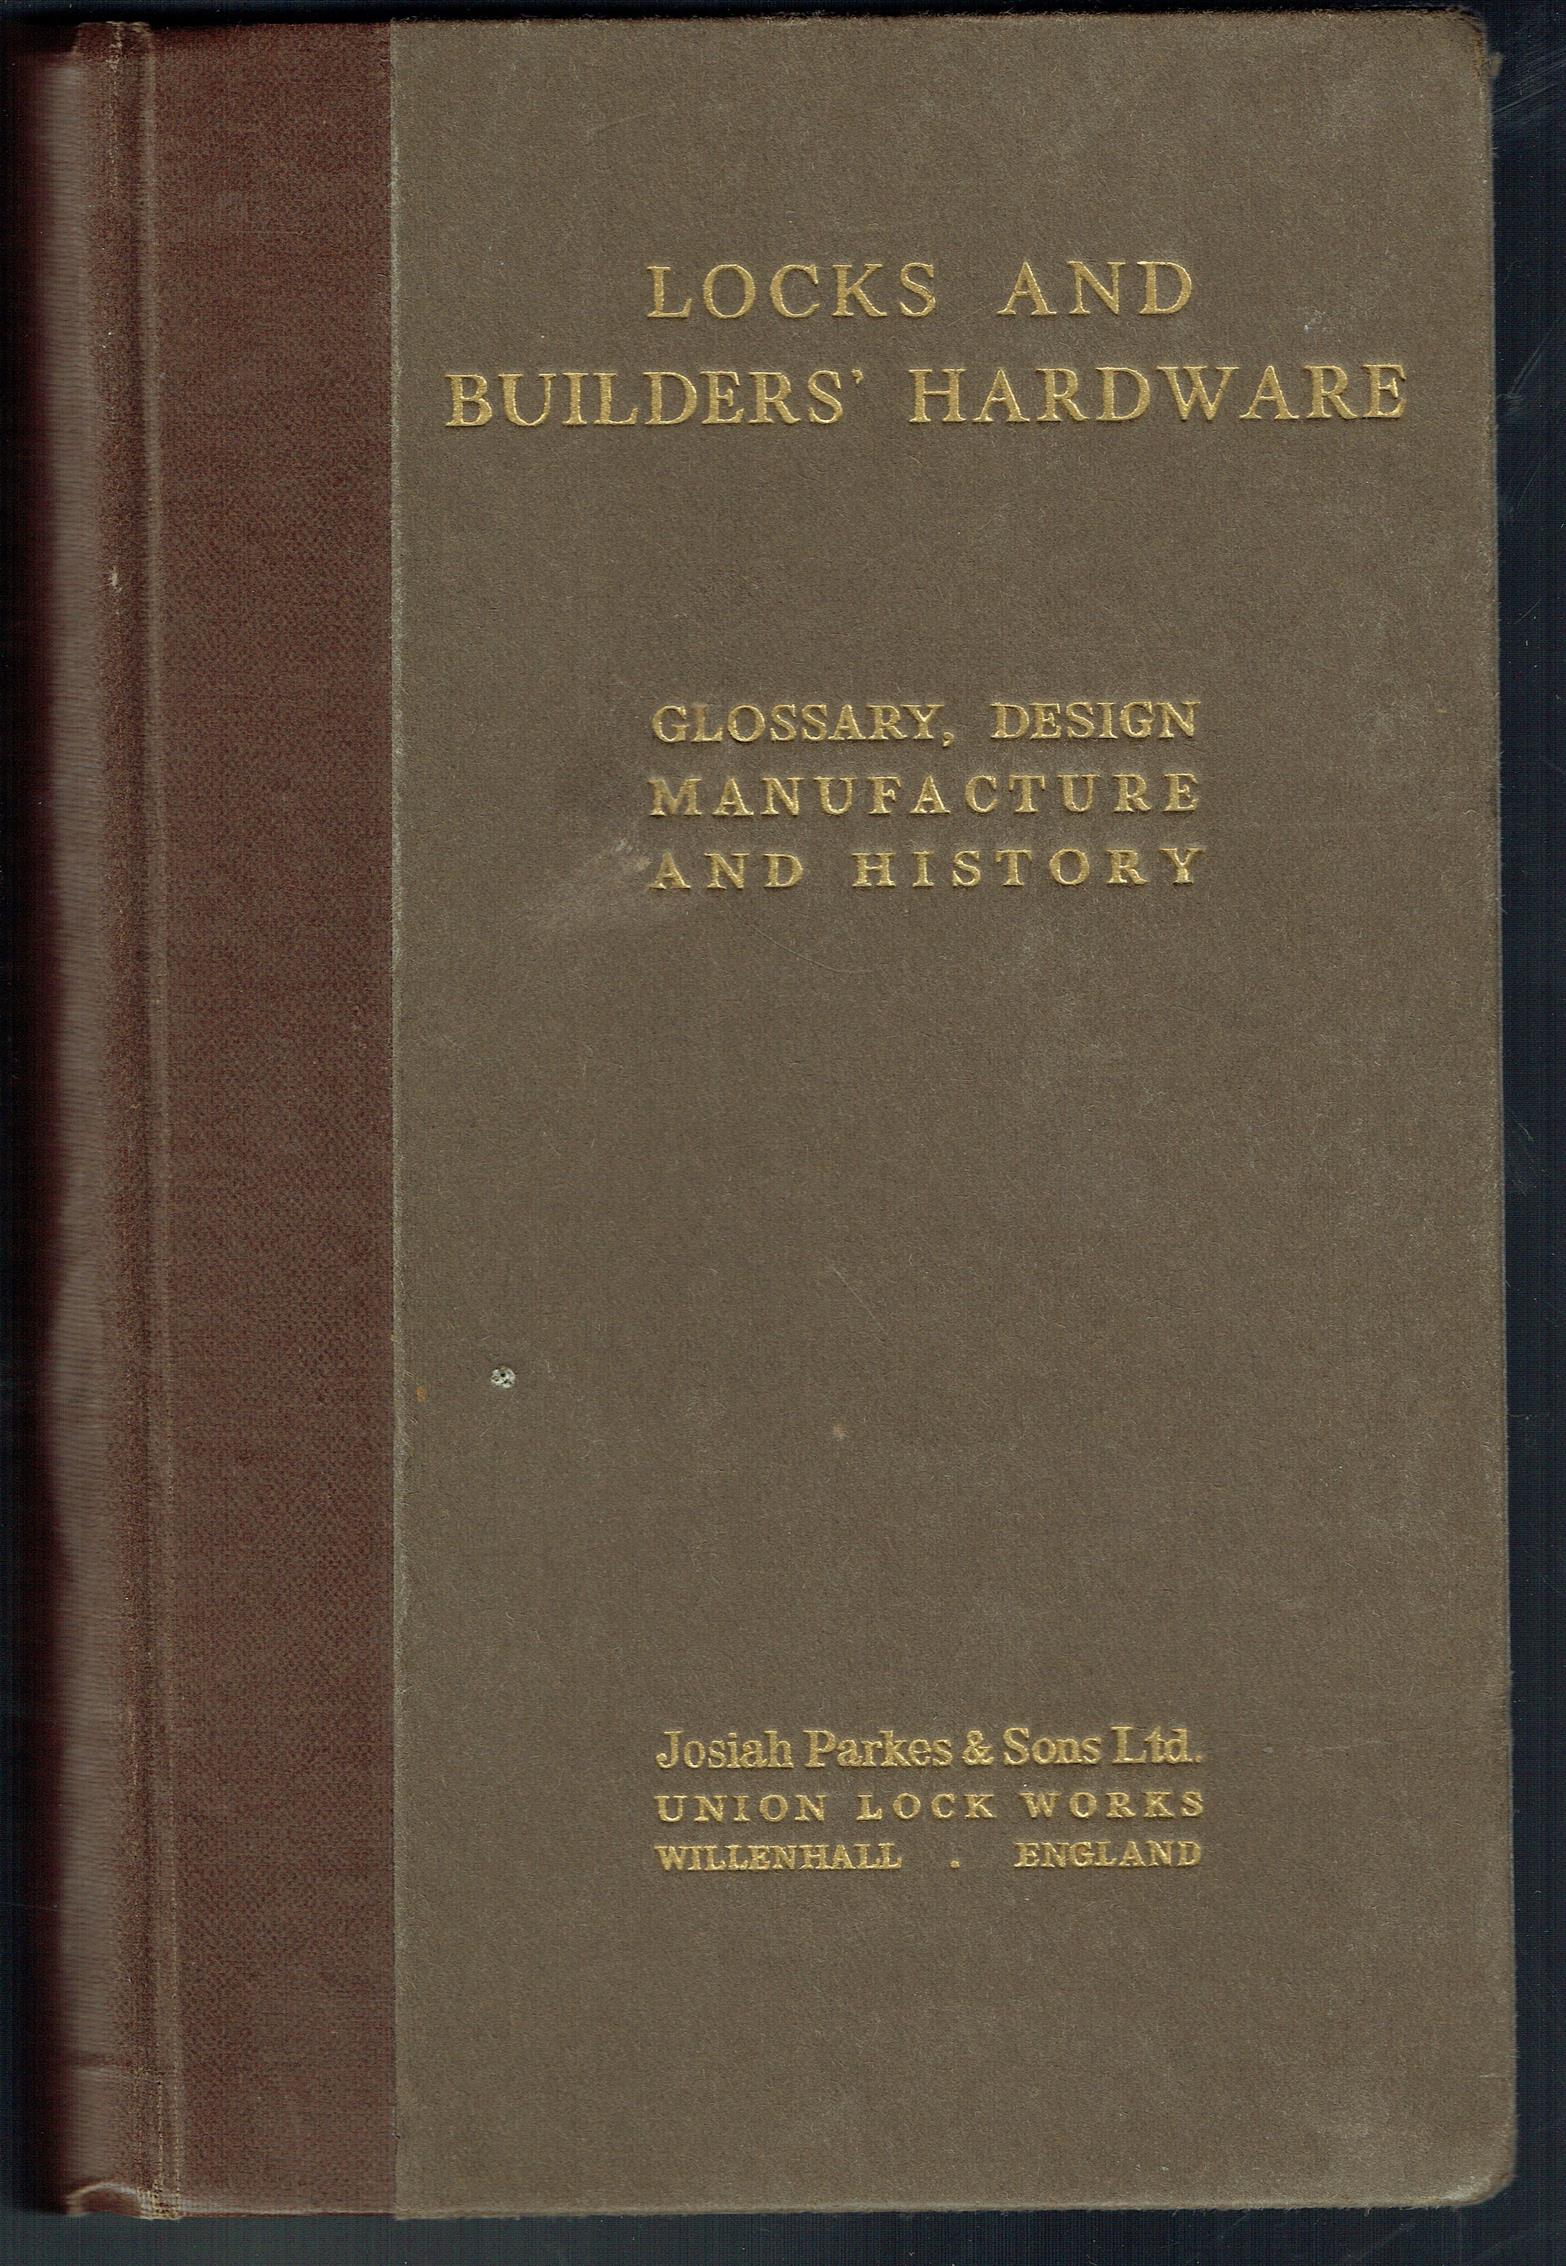 Josiah Parkes & Sons. - Locks, and builders' hardware: glossary, design manufacture and history., Glossary, design manufacture and history of locks and builders' hardware